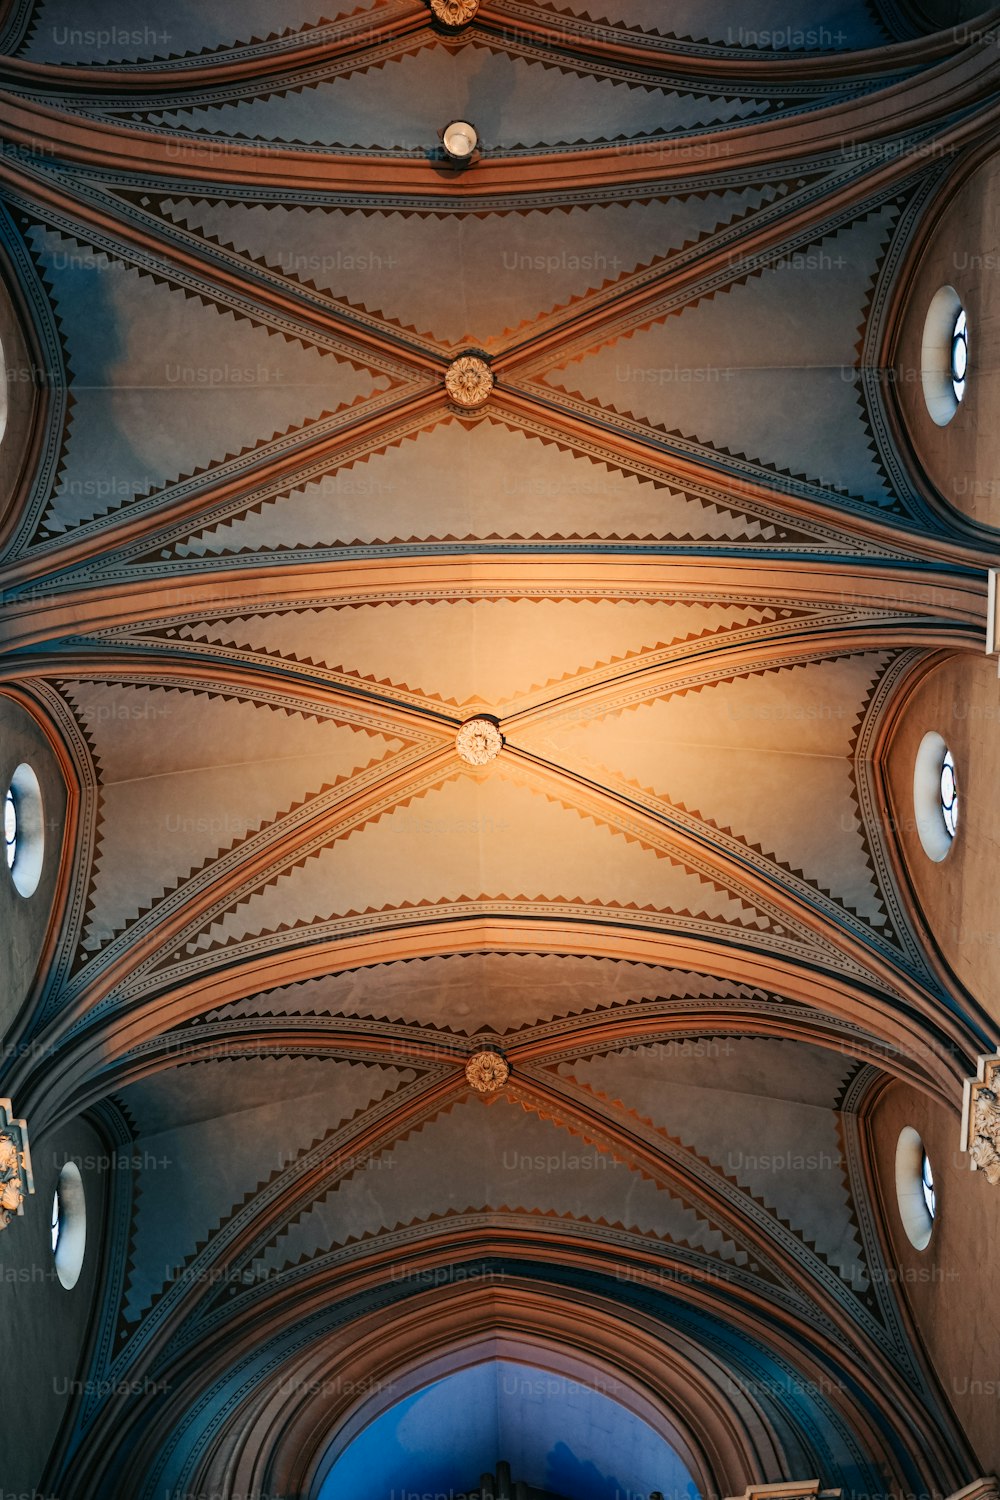 the ceiling of a large cathedral with many windows